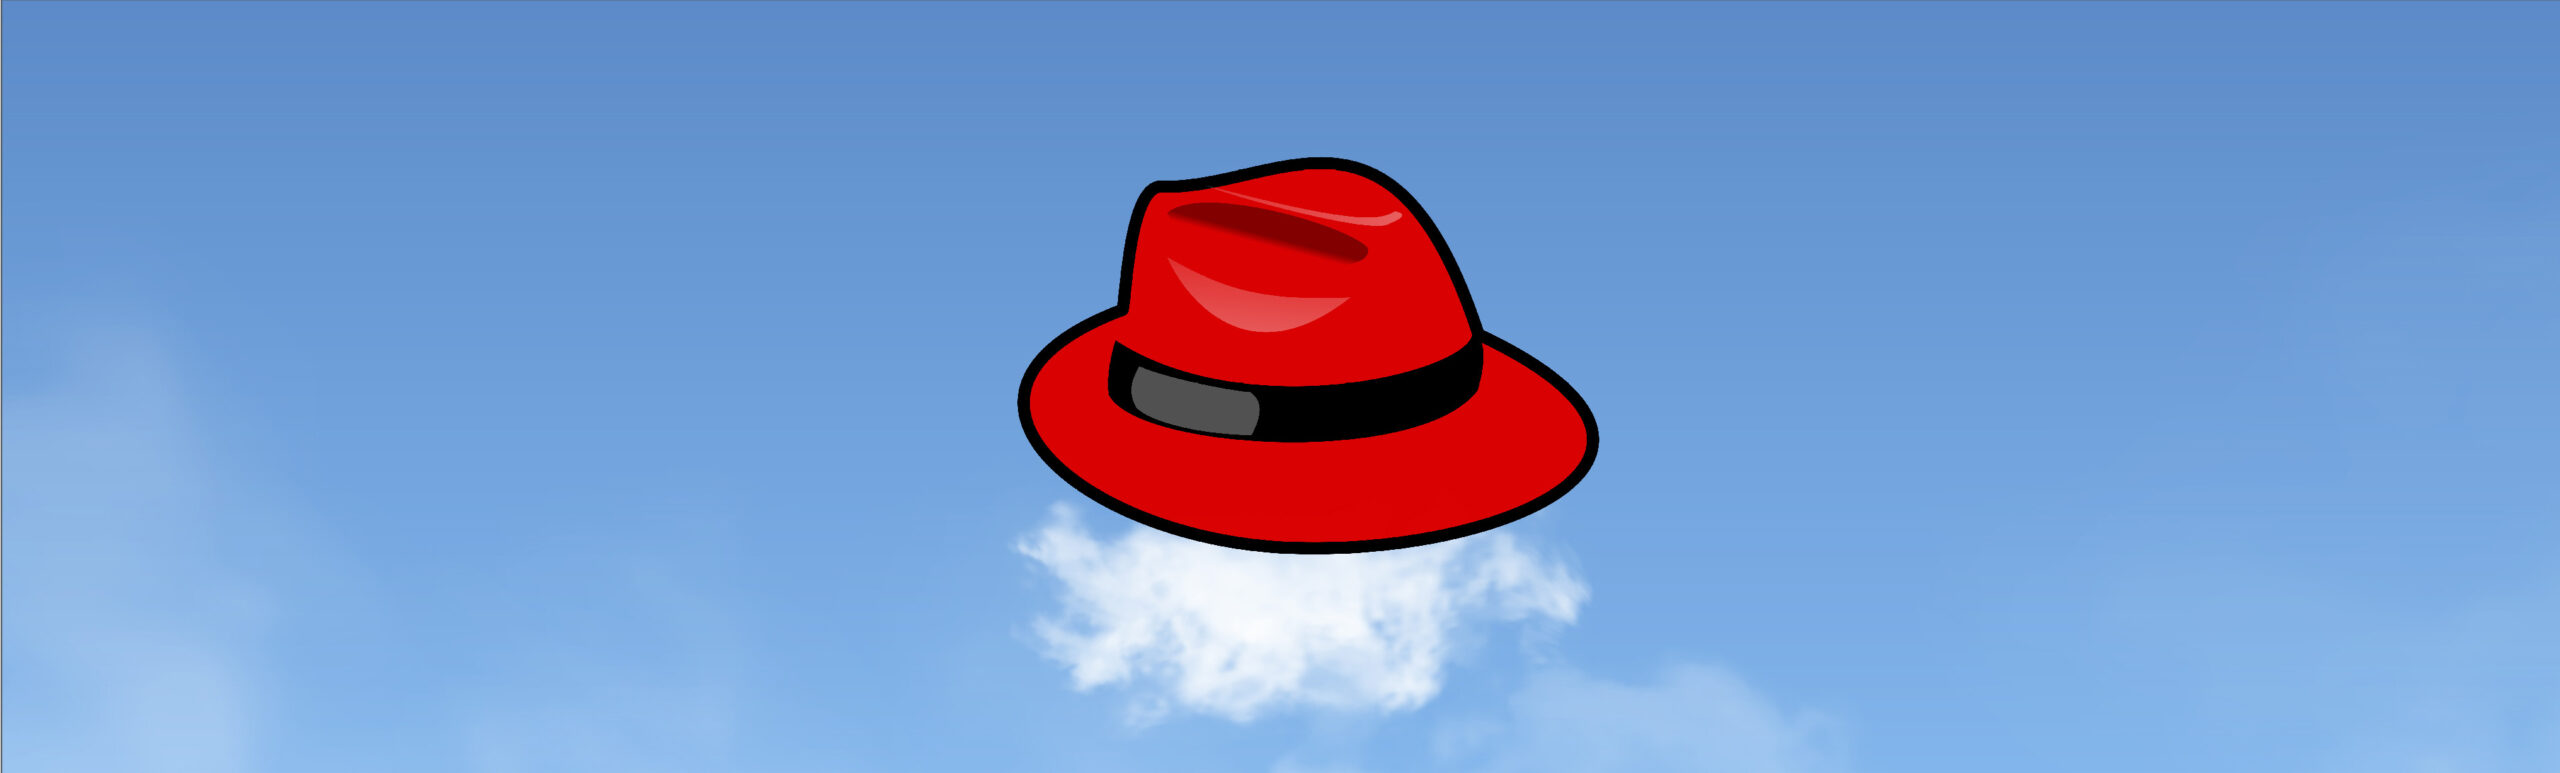 case study red hat